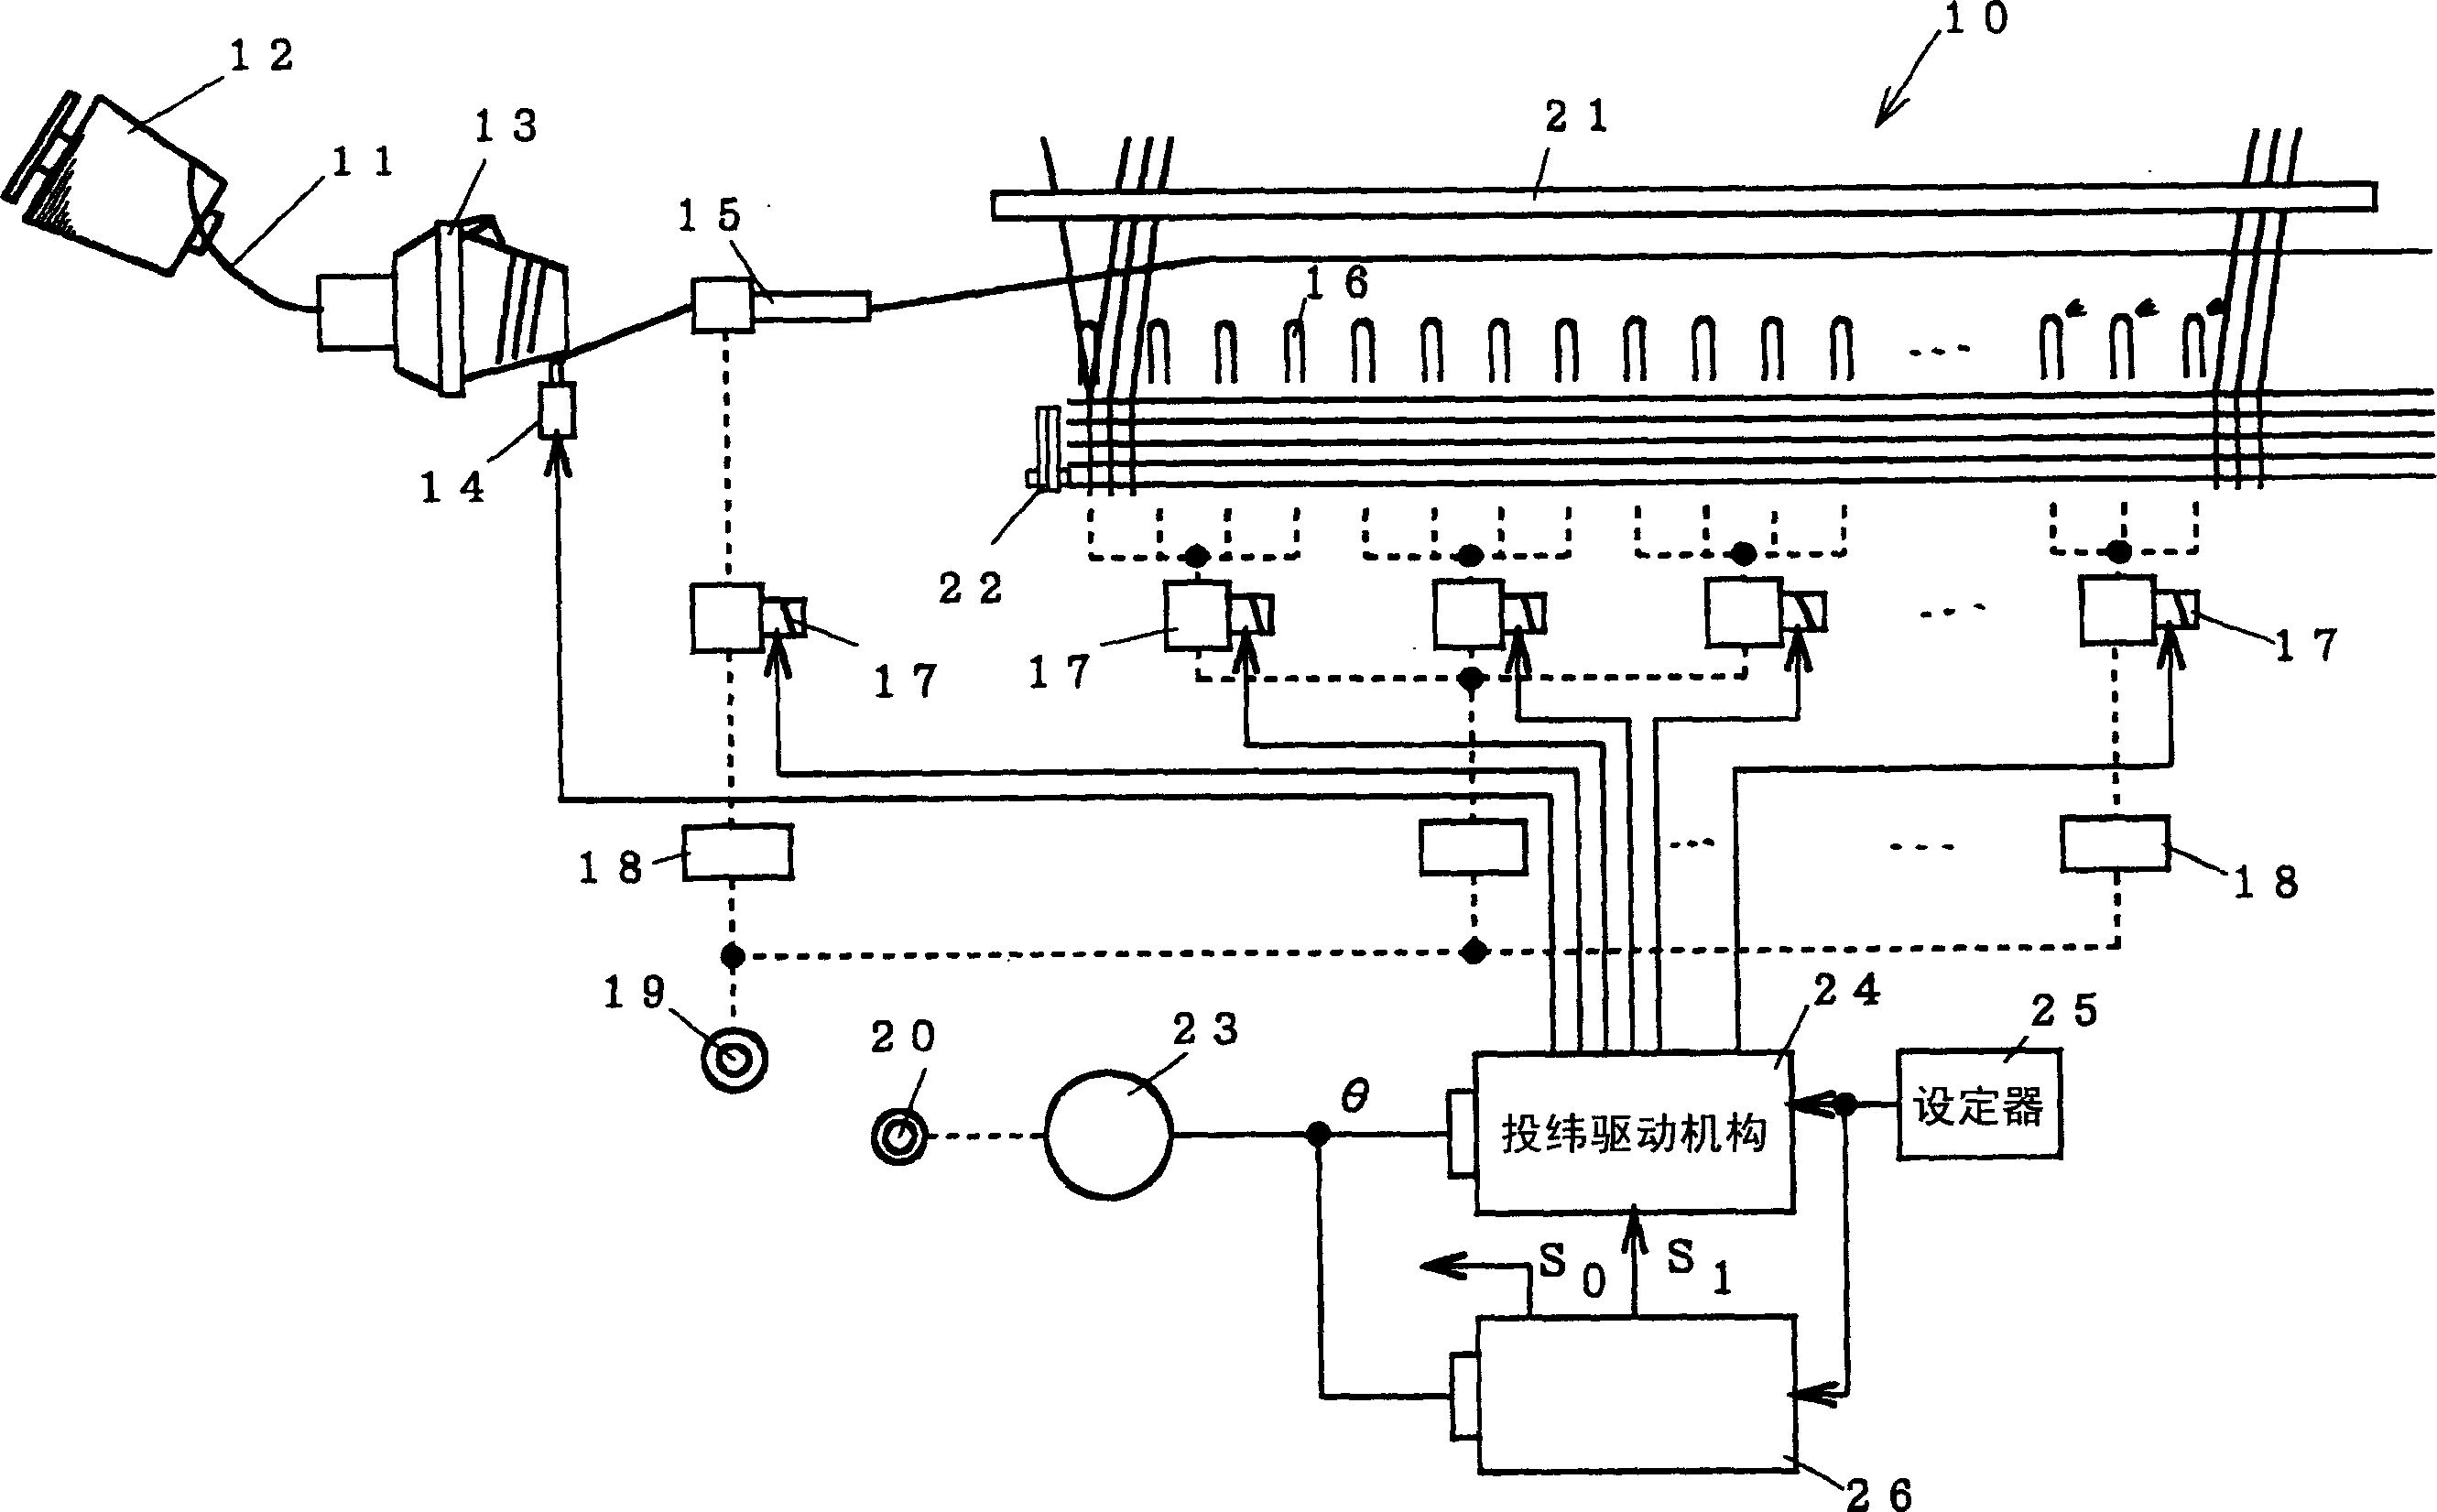 Method for driving induction motor